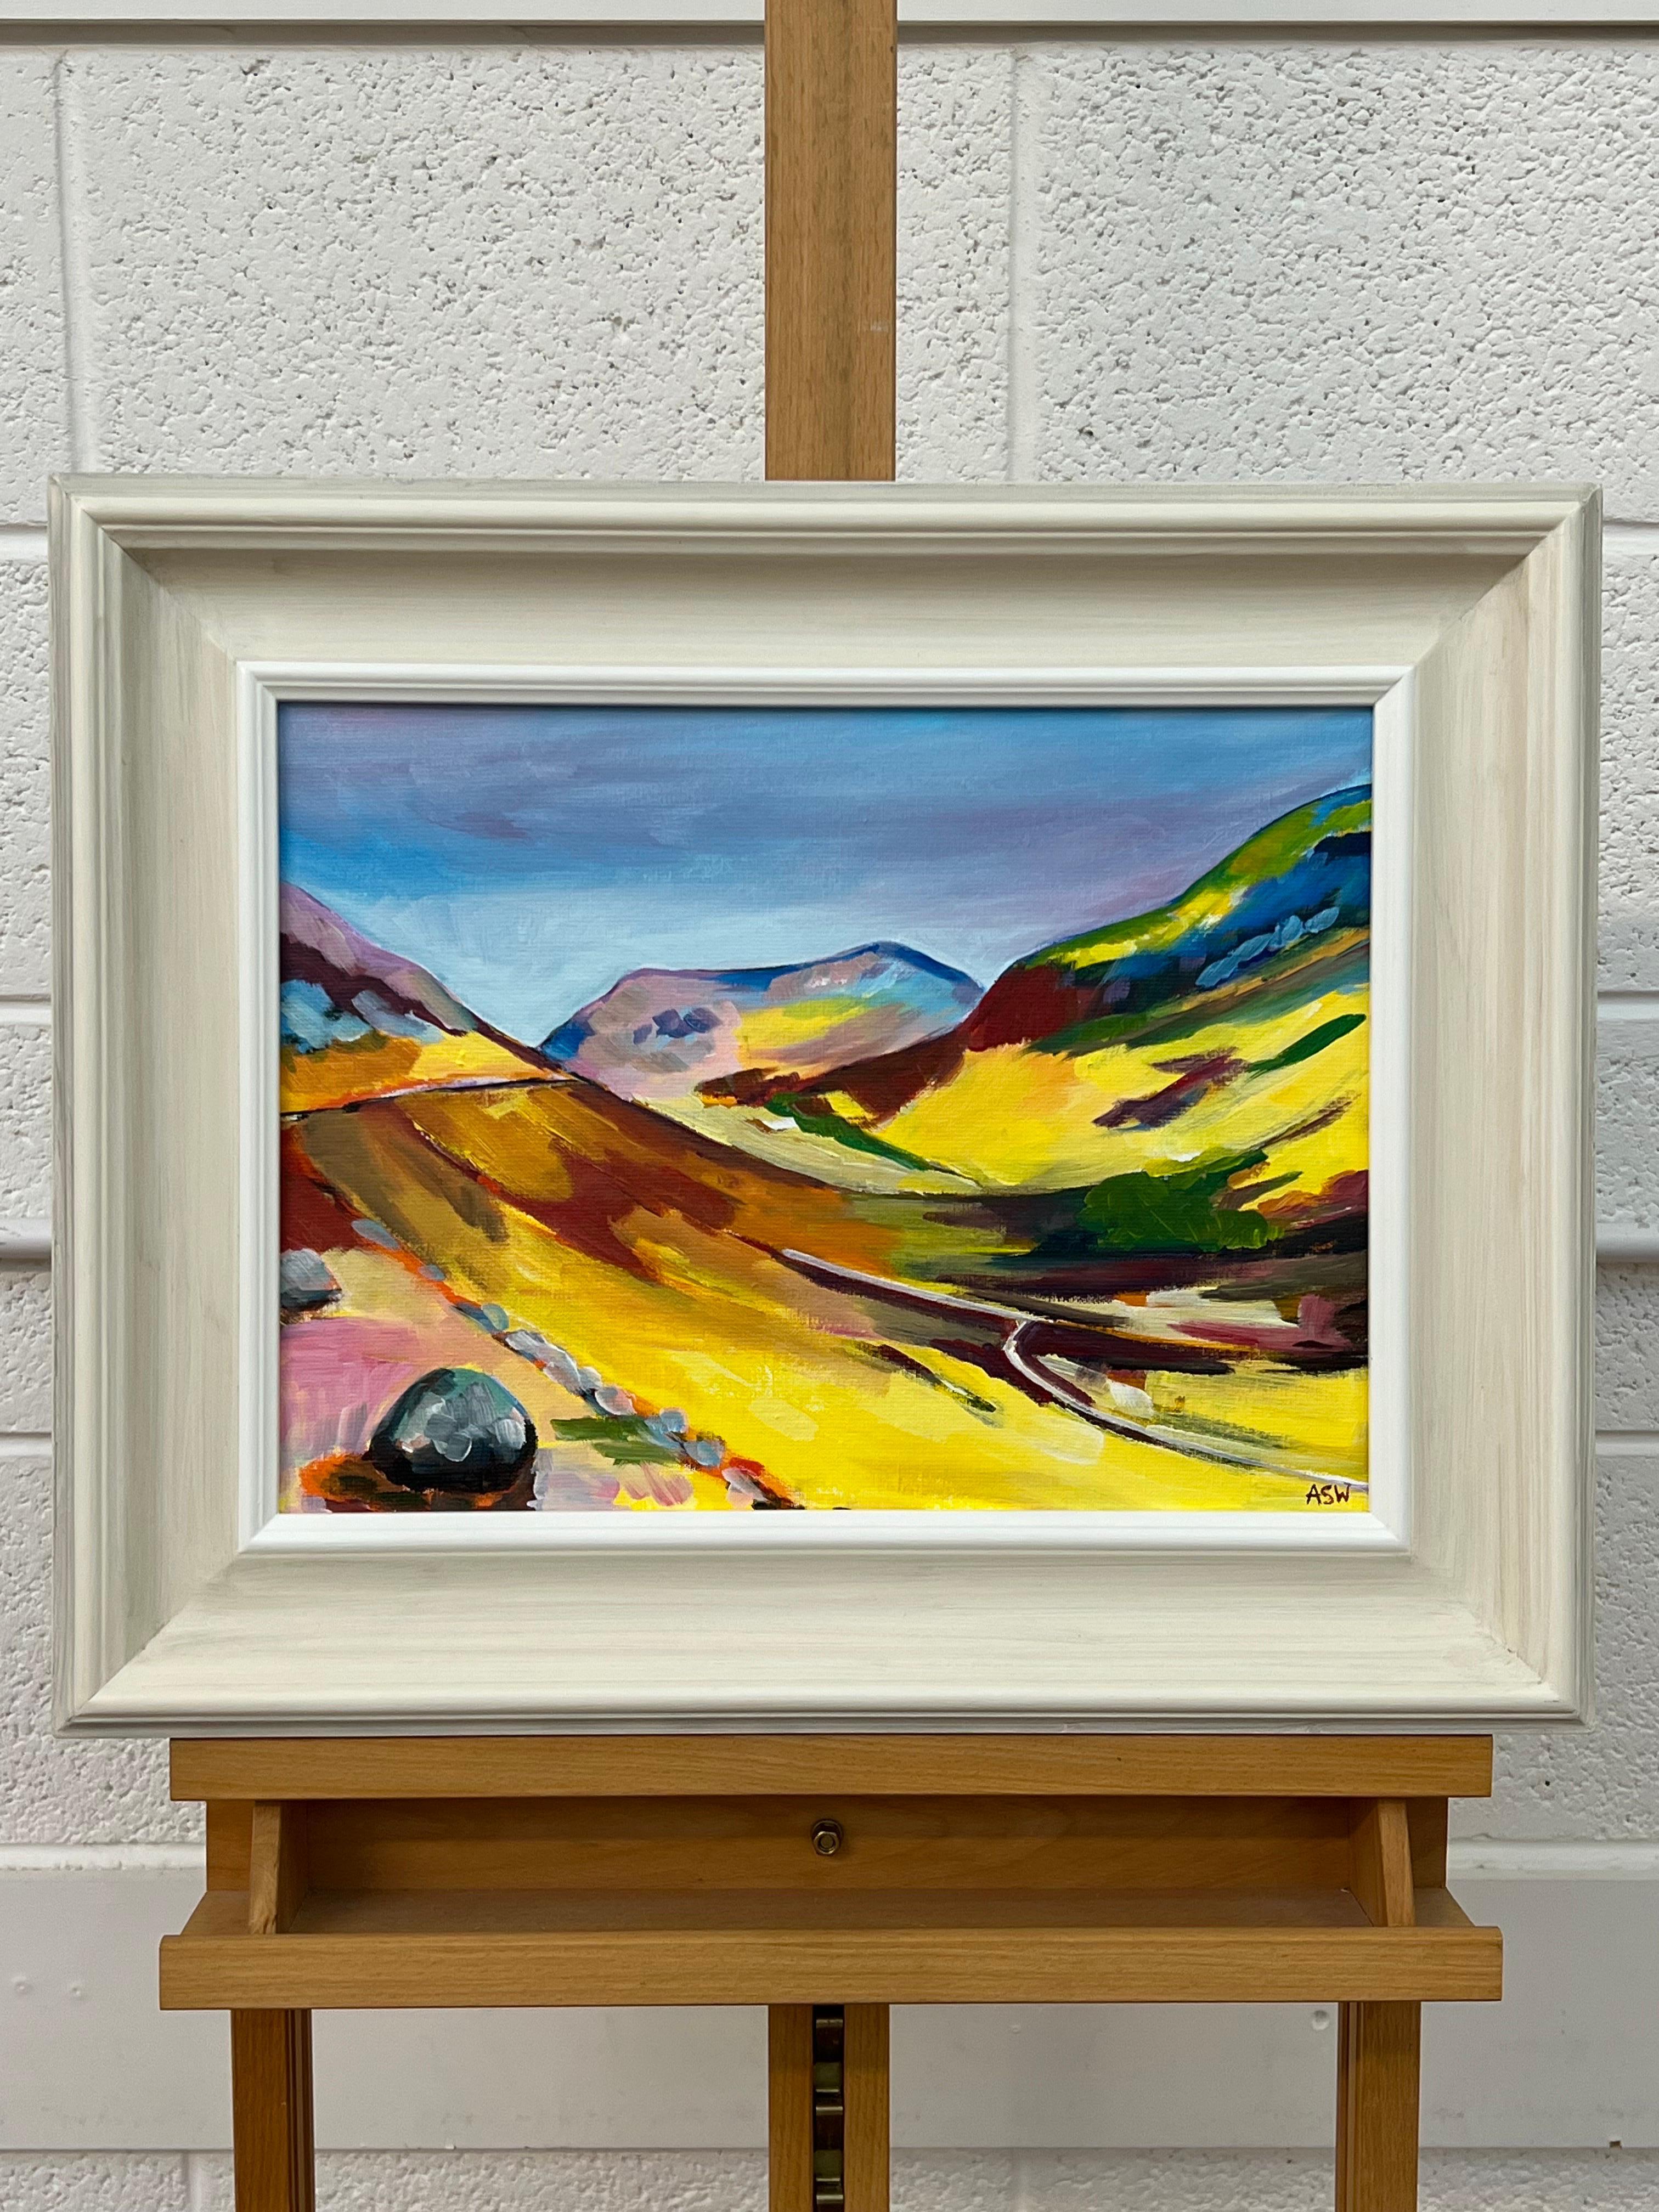 Colourful Yellow Abstract Landscape Painting of the Scottish Highlands by British Contemporary Artist, Angela Wakefield. Framed in the highest quality hand-finished off-white moulding 

Art measures 16 x 12 inches
Frame measures 22 x 18